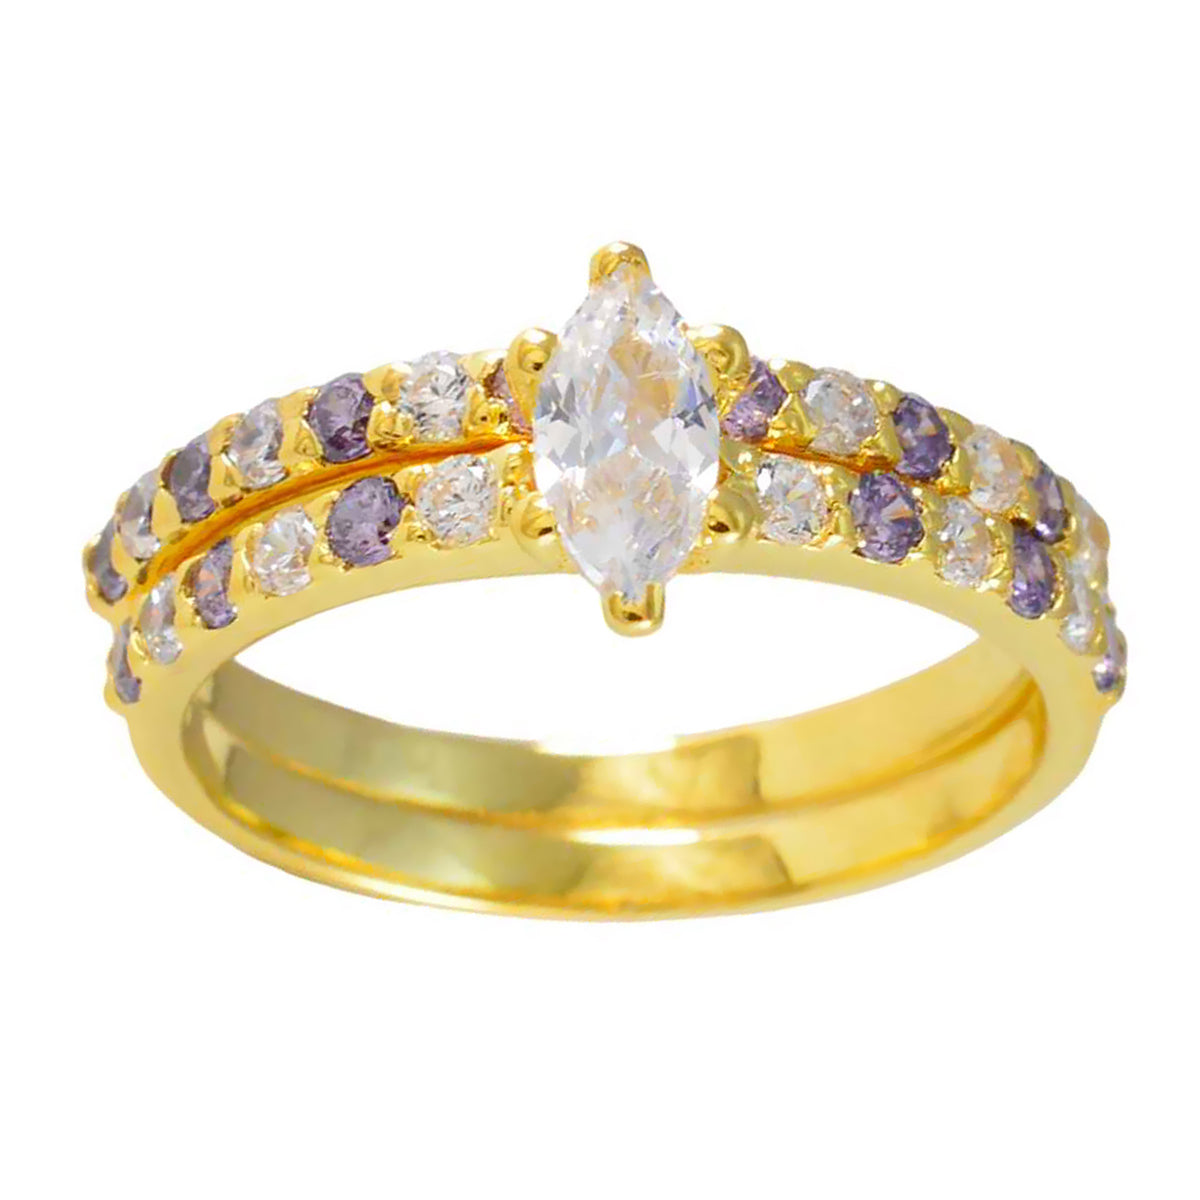 Riyo Attractive Silver Ring With Yellow Gold Plating Amethyst Stone Marquise Shape Prong Setting Designer Jewelry Black Friday Ring